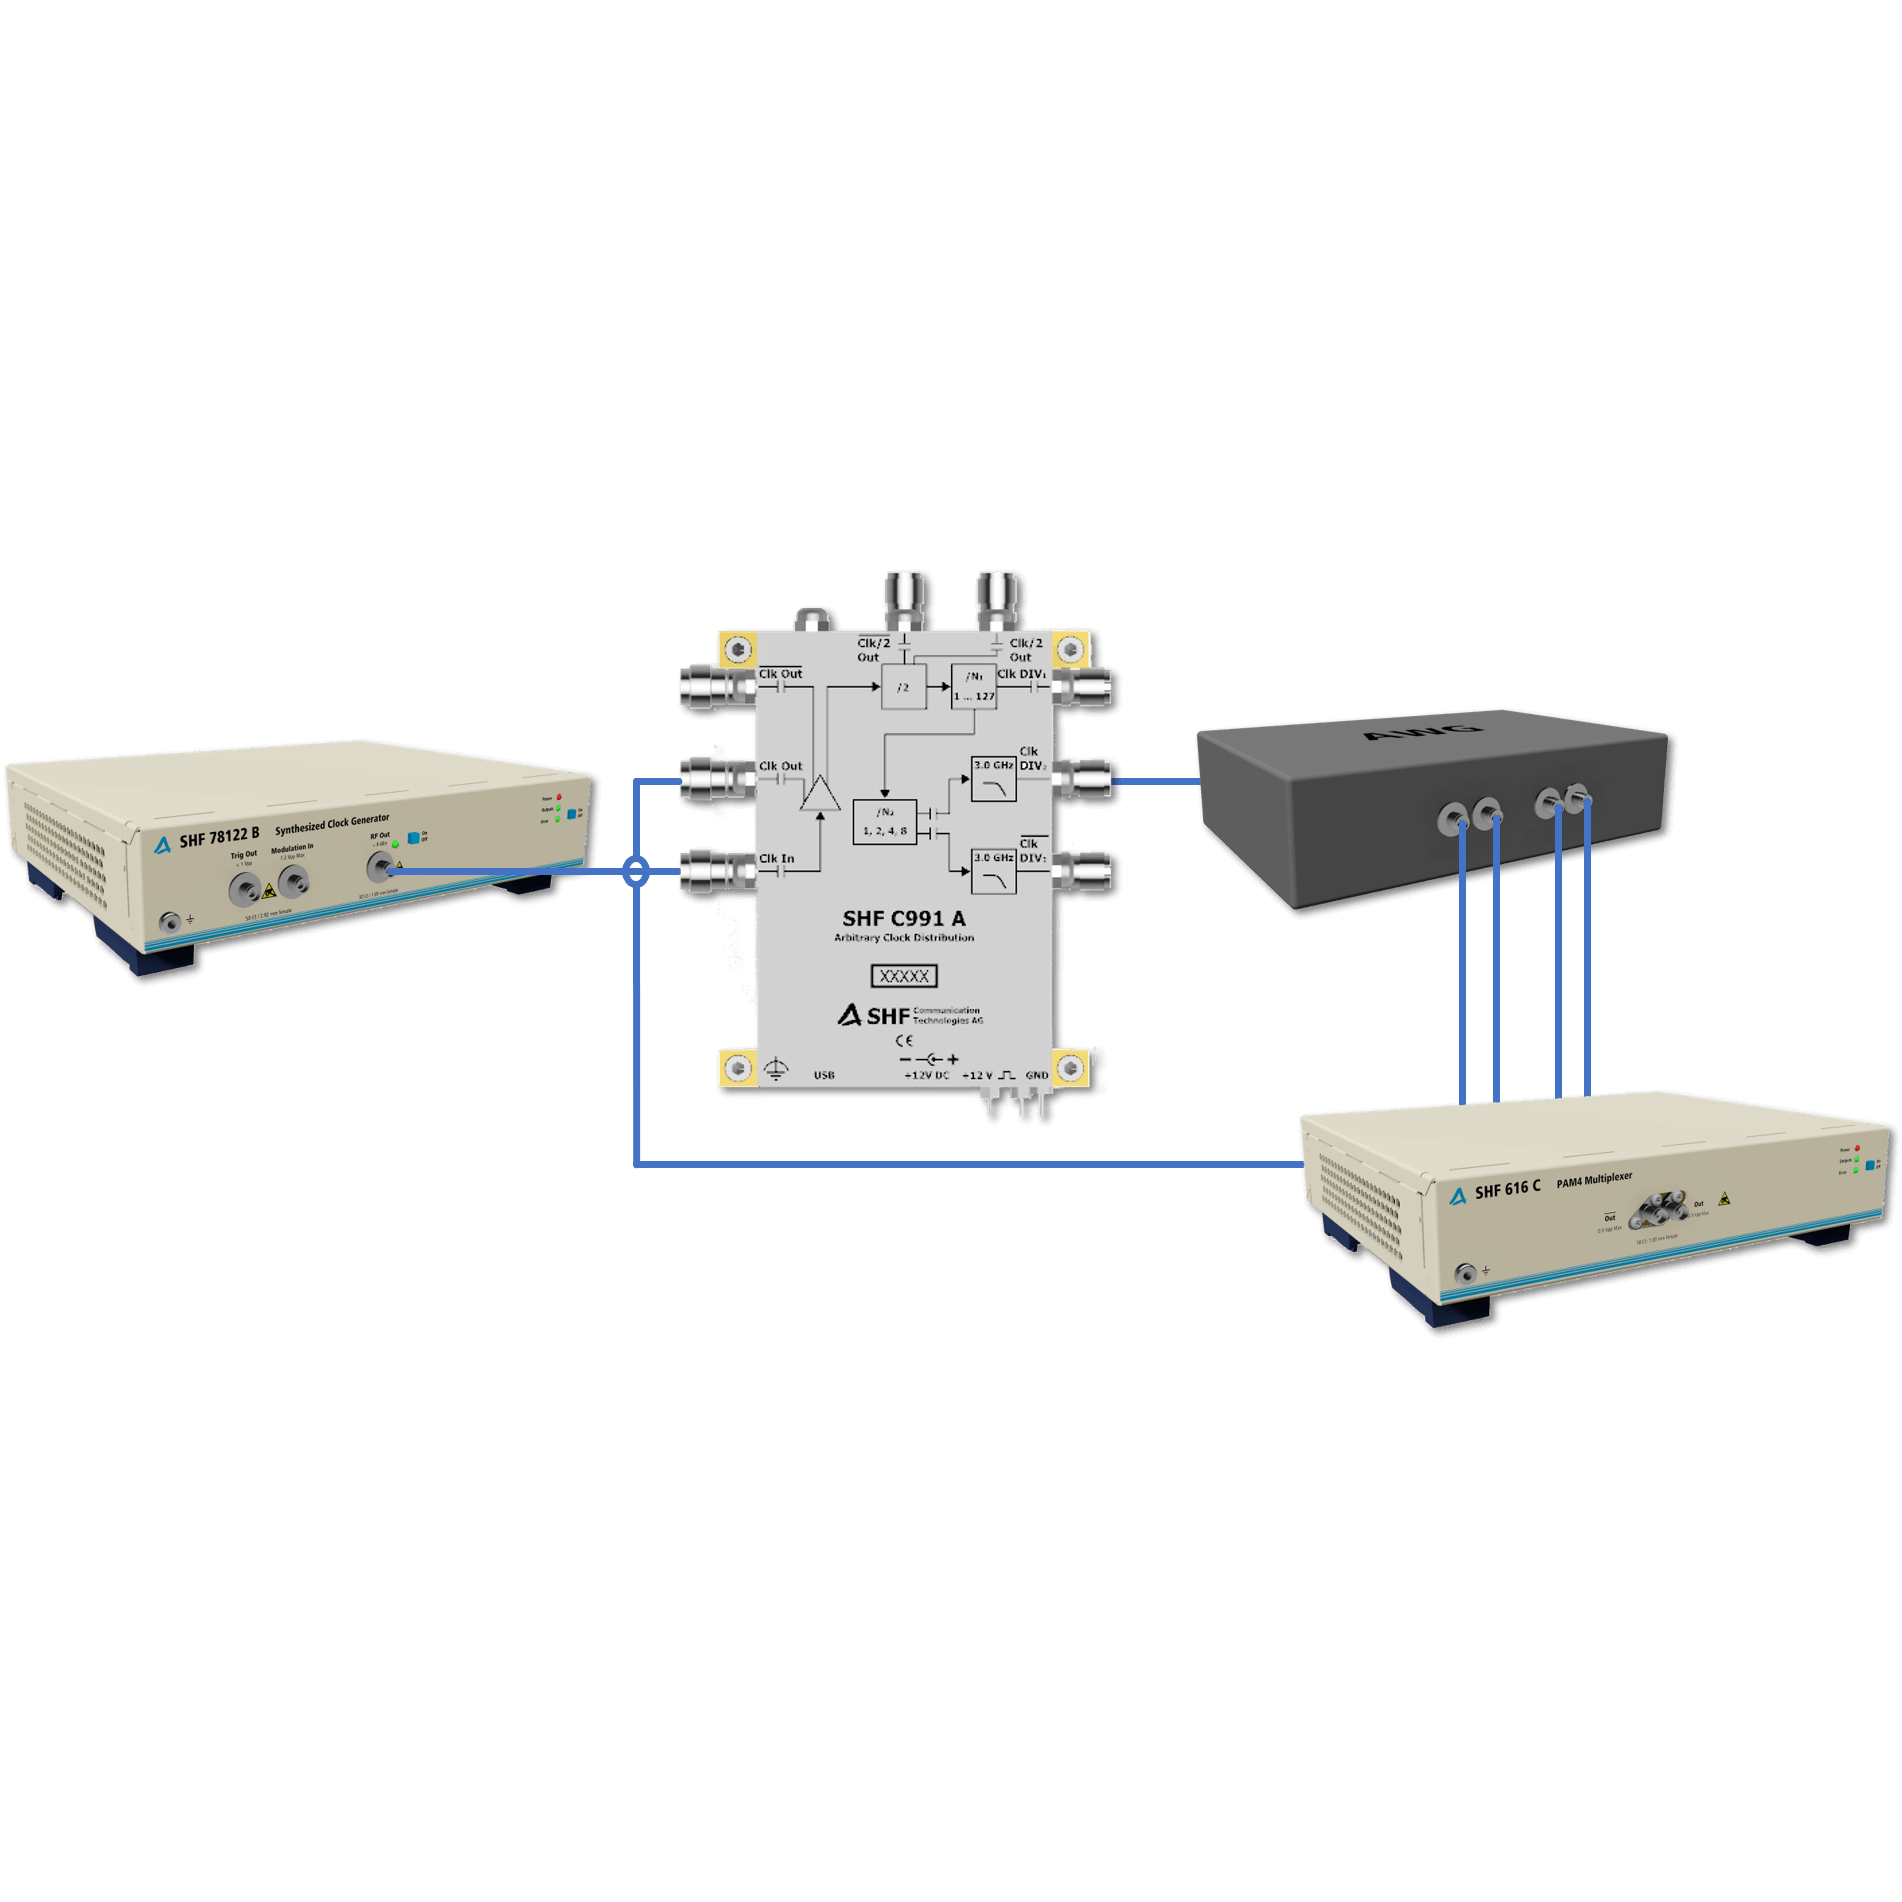 Clock Distribution enables 100 GBaud from existing AWGs